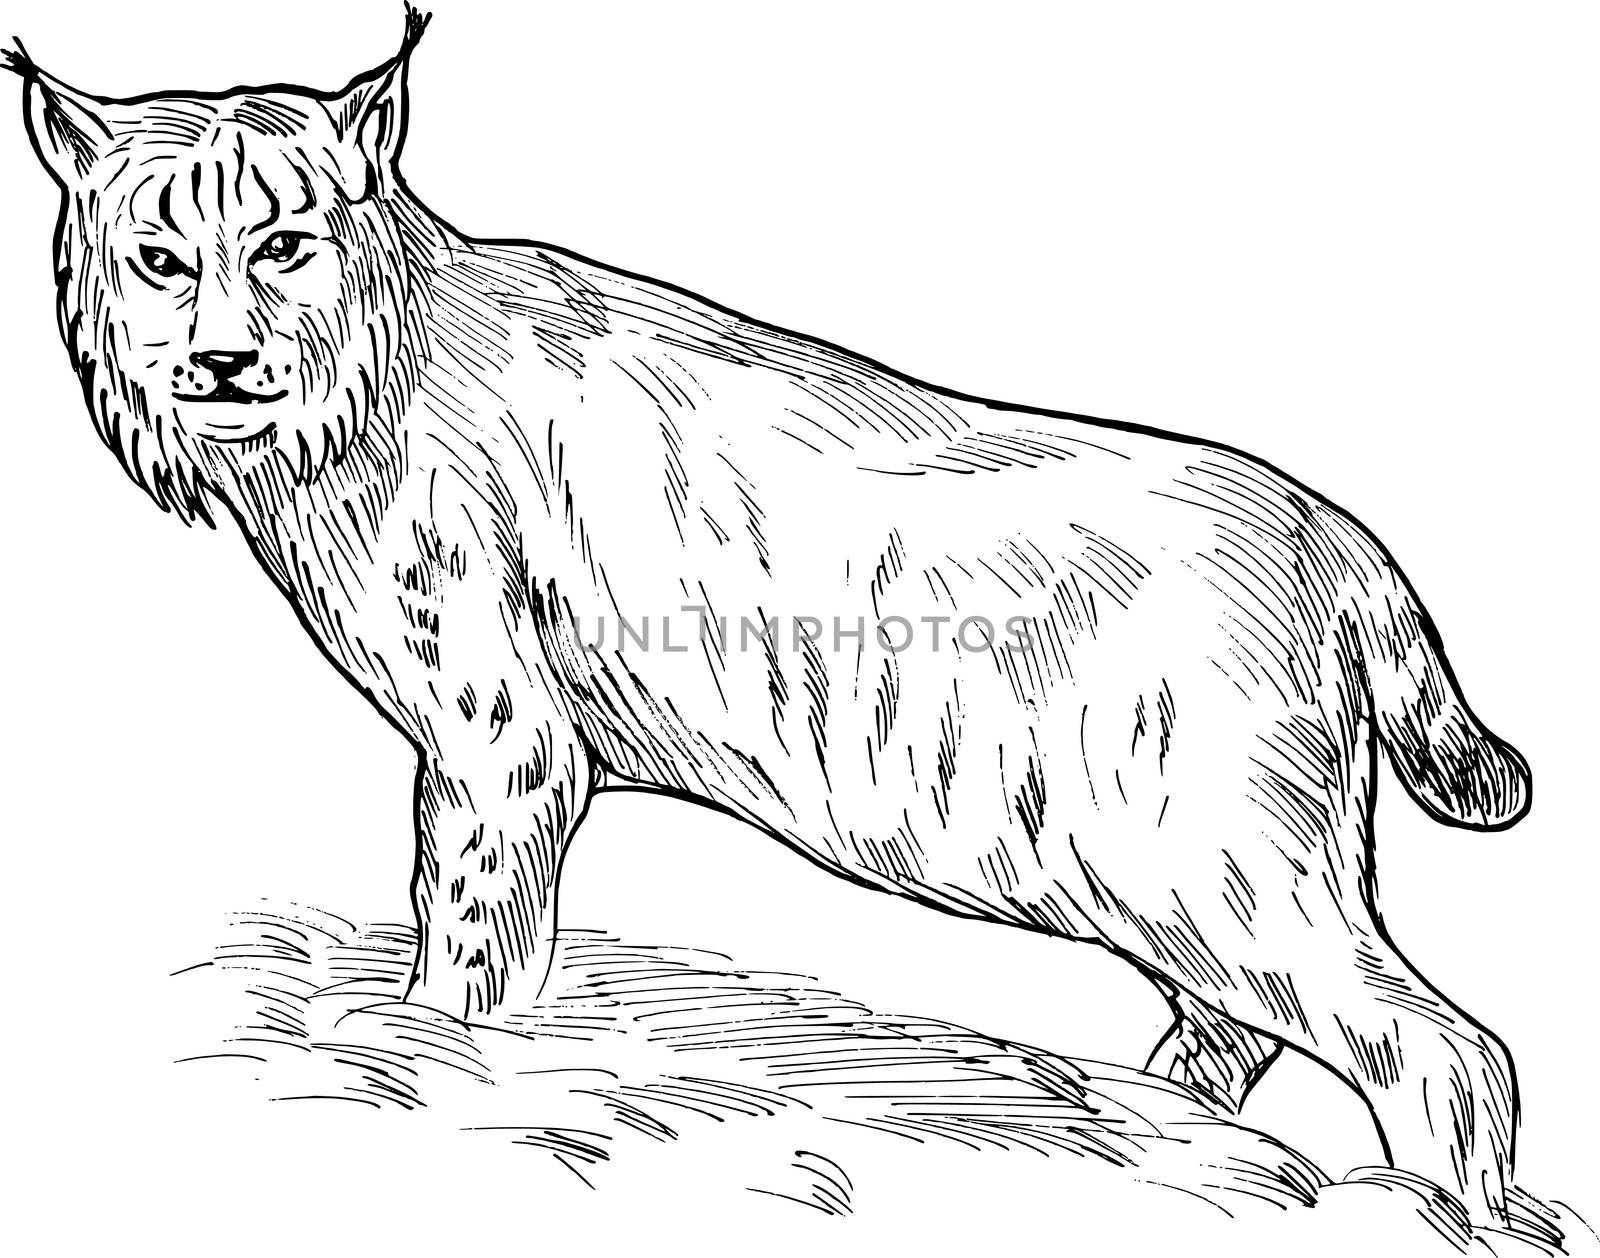 hand sketch drawing illustration of a Eurasian lynx done in black and white